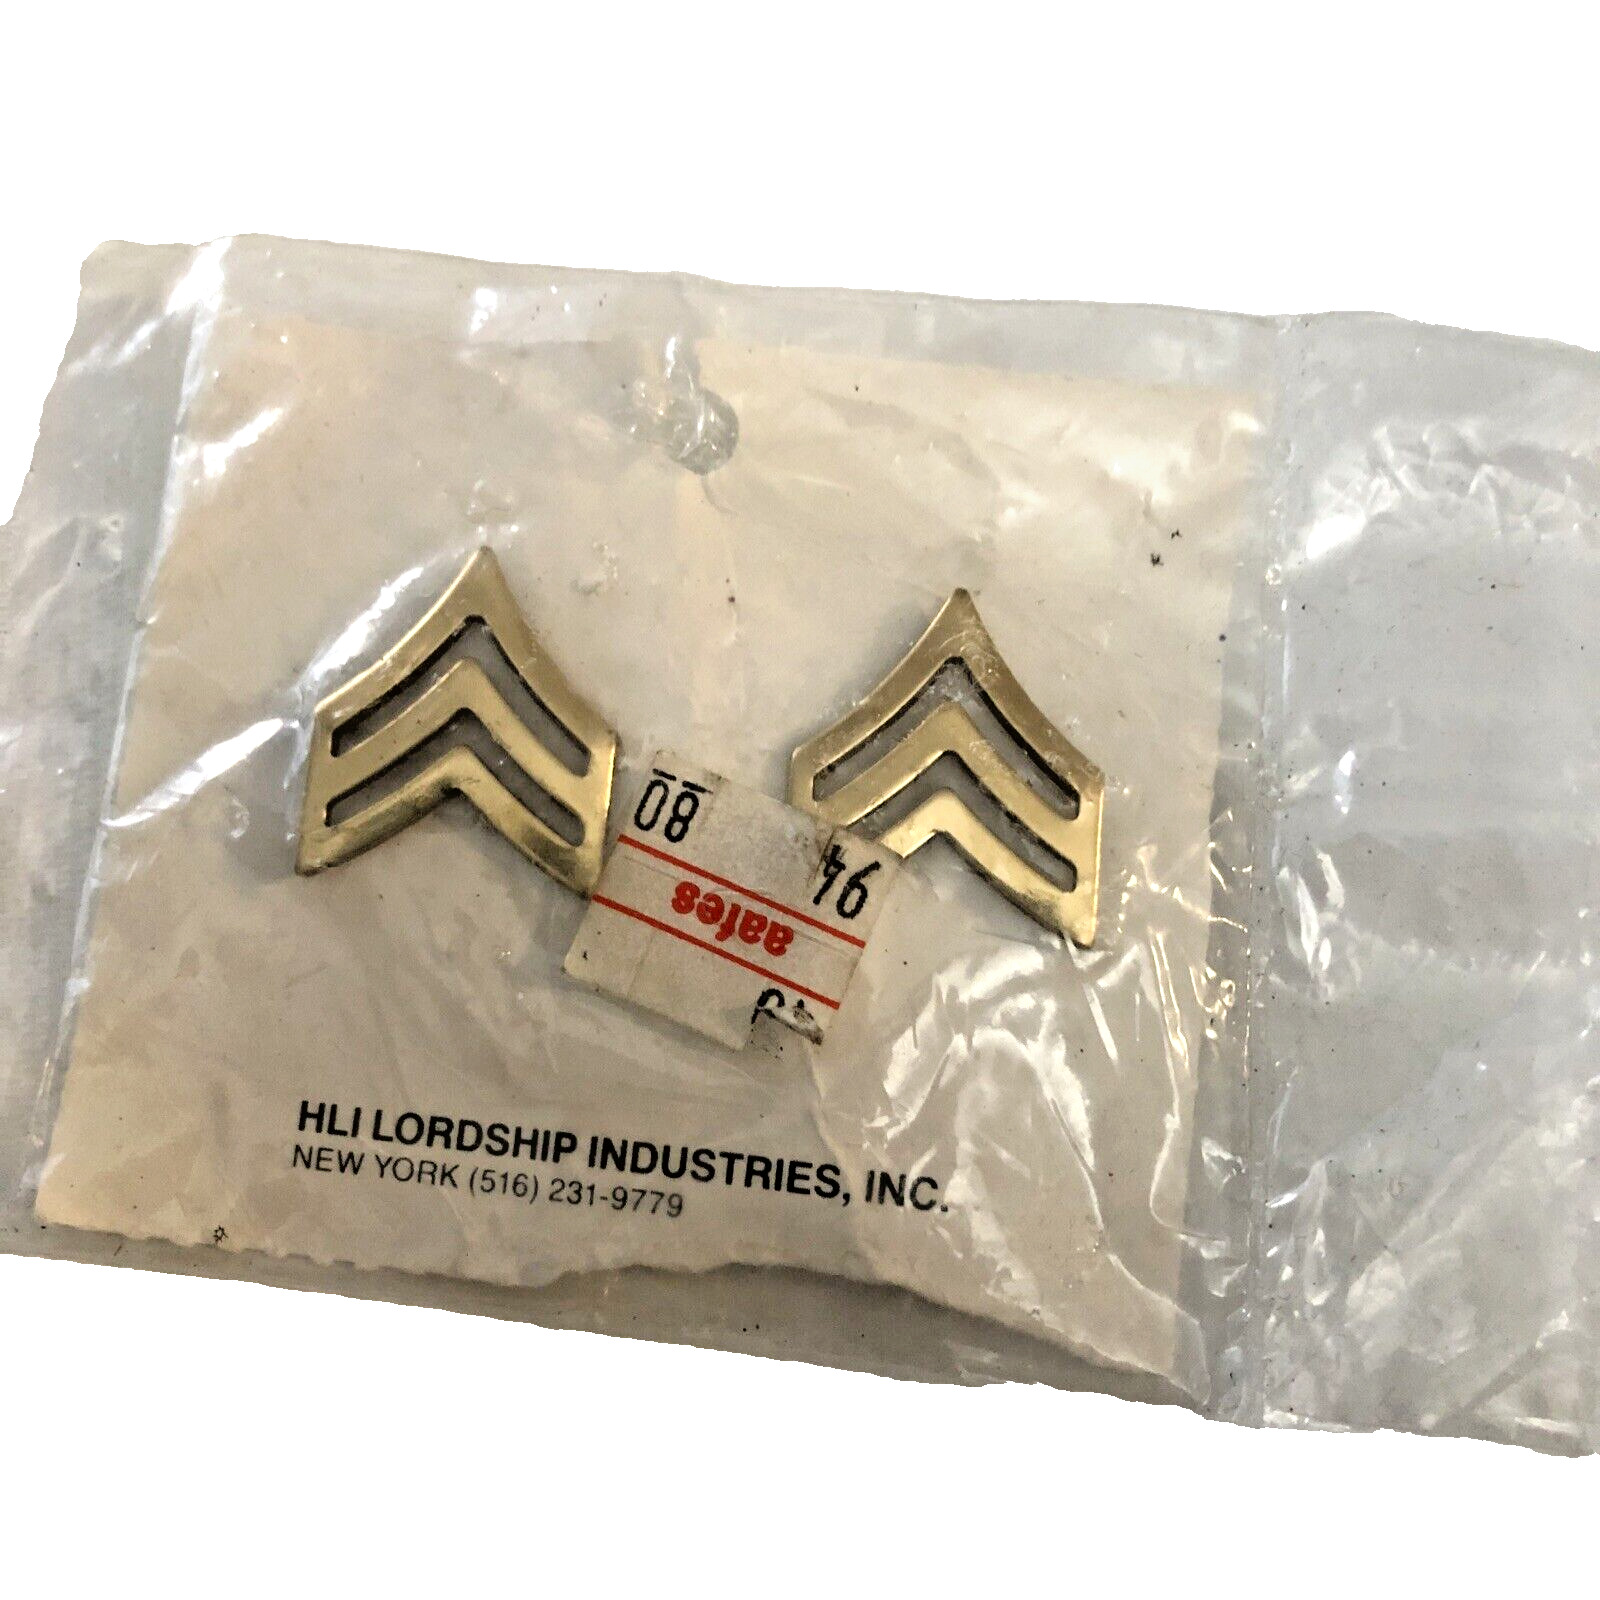 New ---- US Army New HLI Lordship Industry New York PAIR OF RANK INSIGNIAS Pins